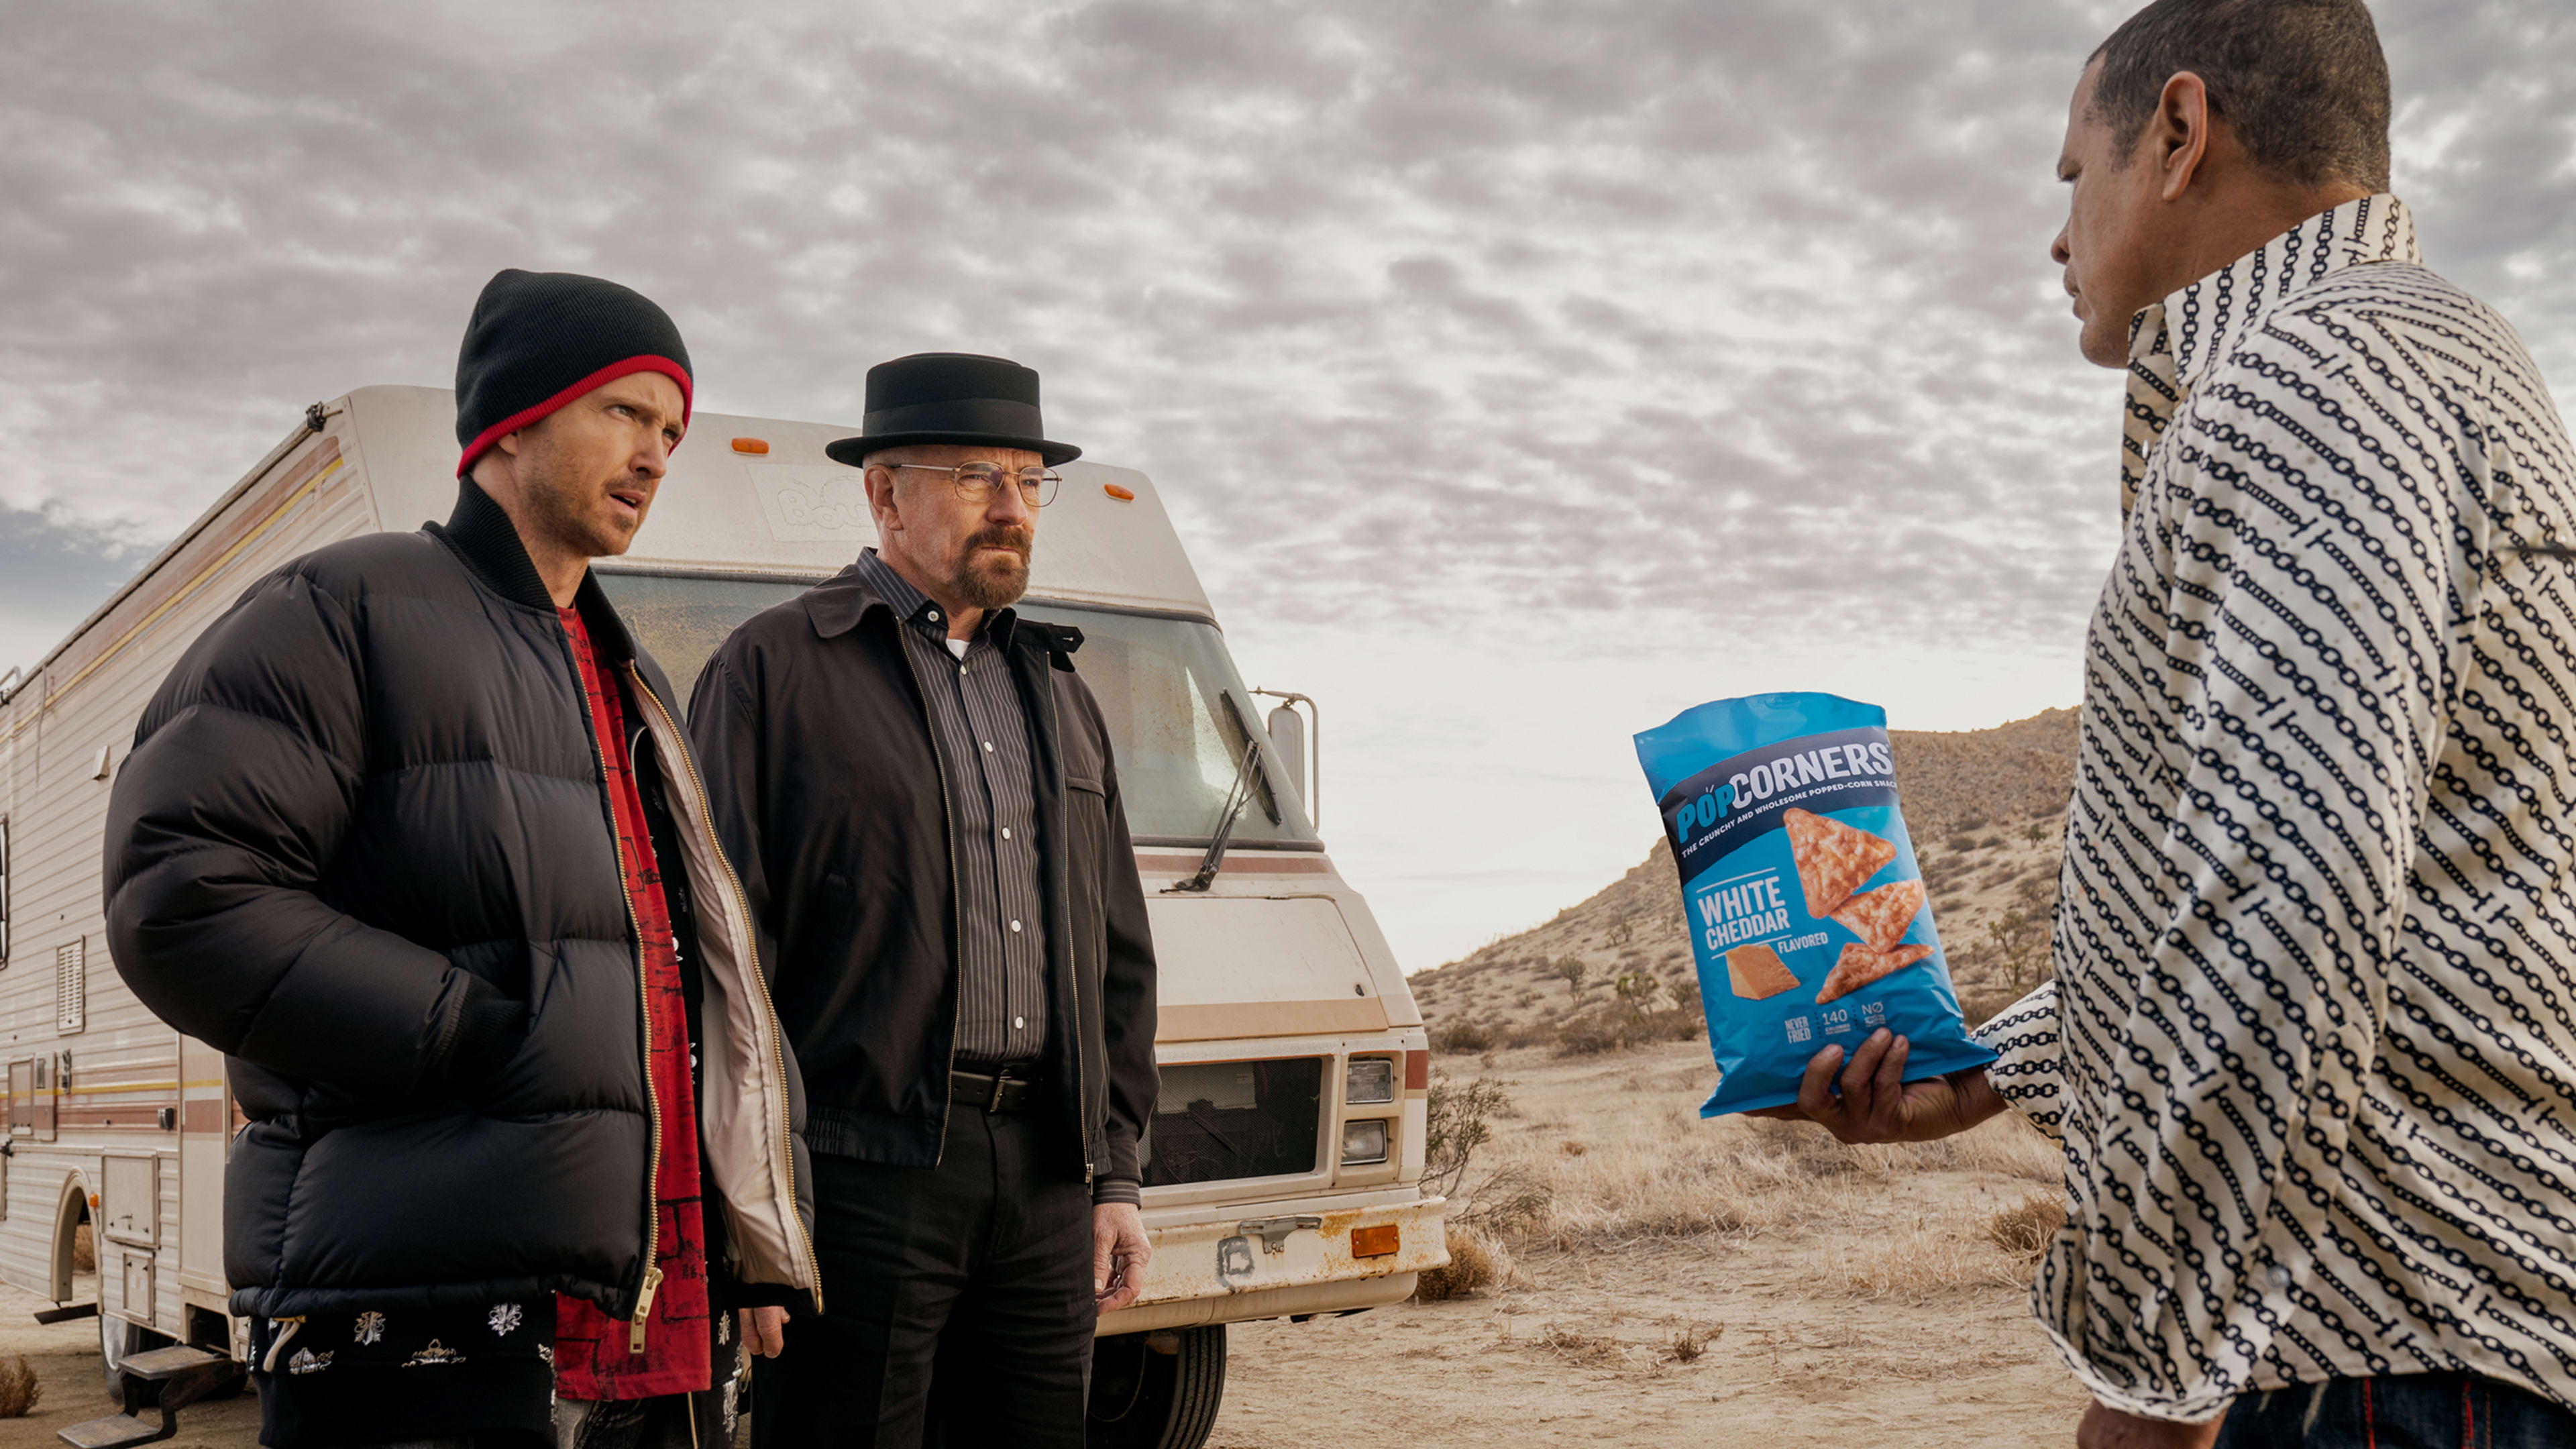 PopCorners swaps meth for chips in nostalgia-fueled ‘Breaking Bad’ Super Bowl ad